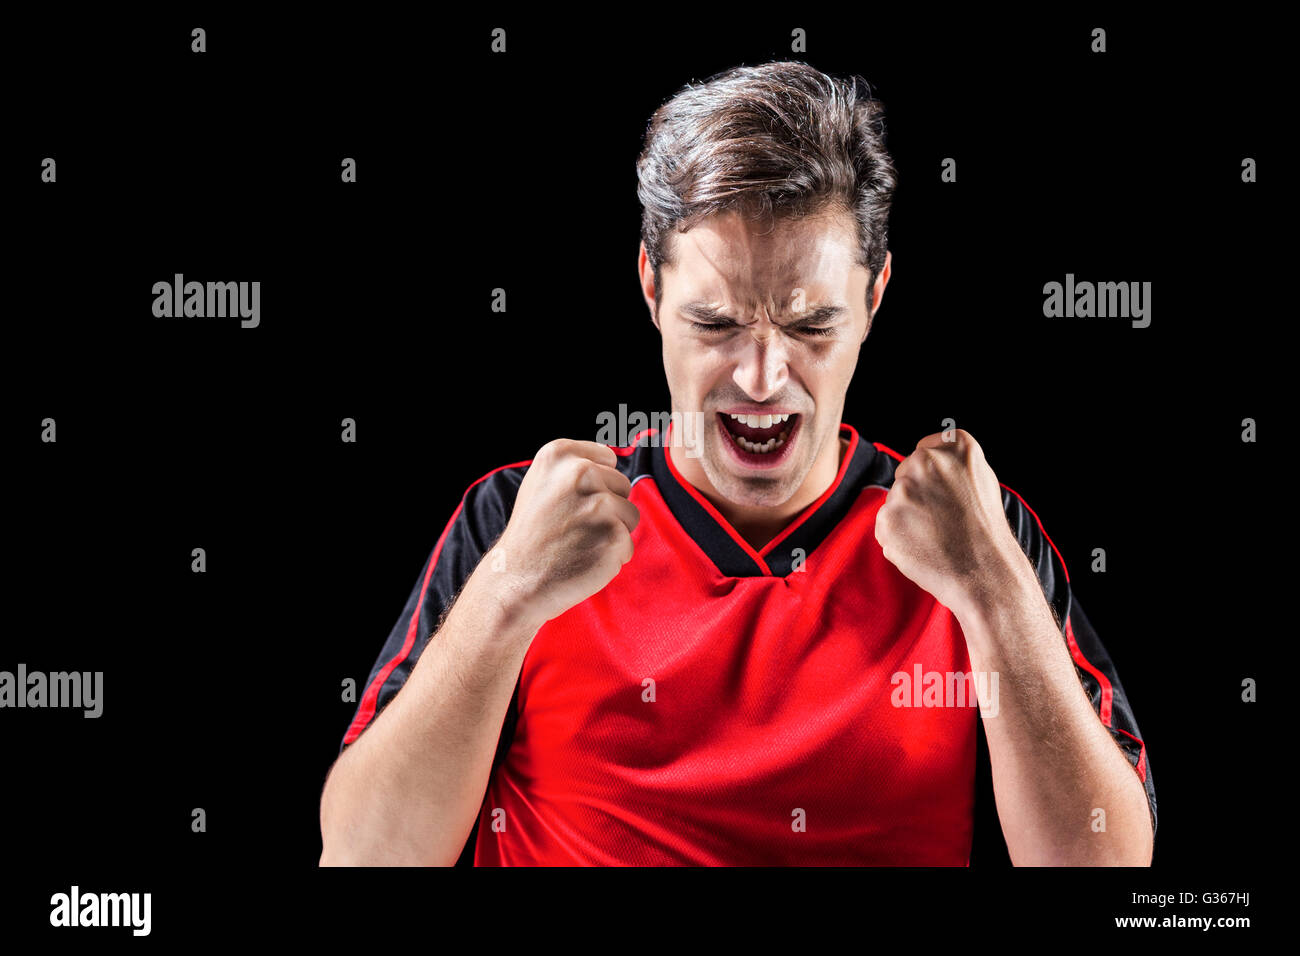 Male athlete posing after victory Stock Photo